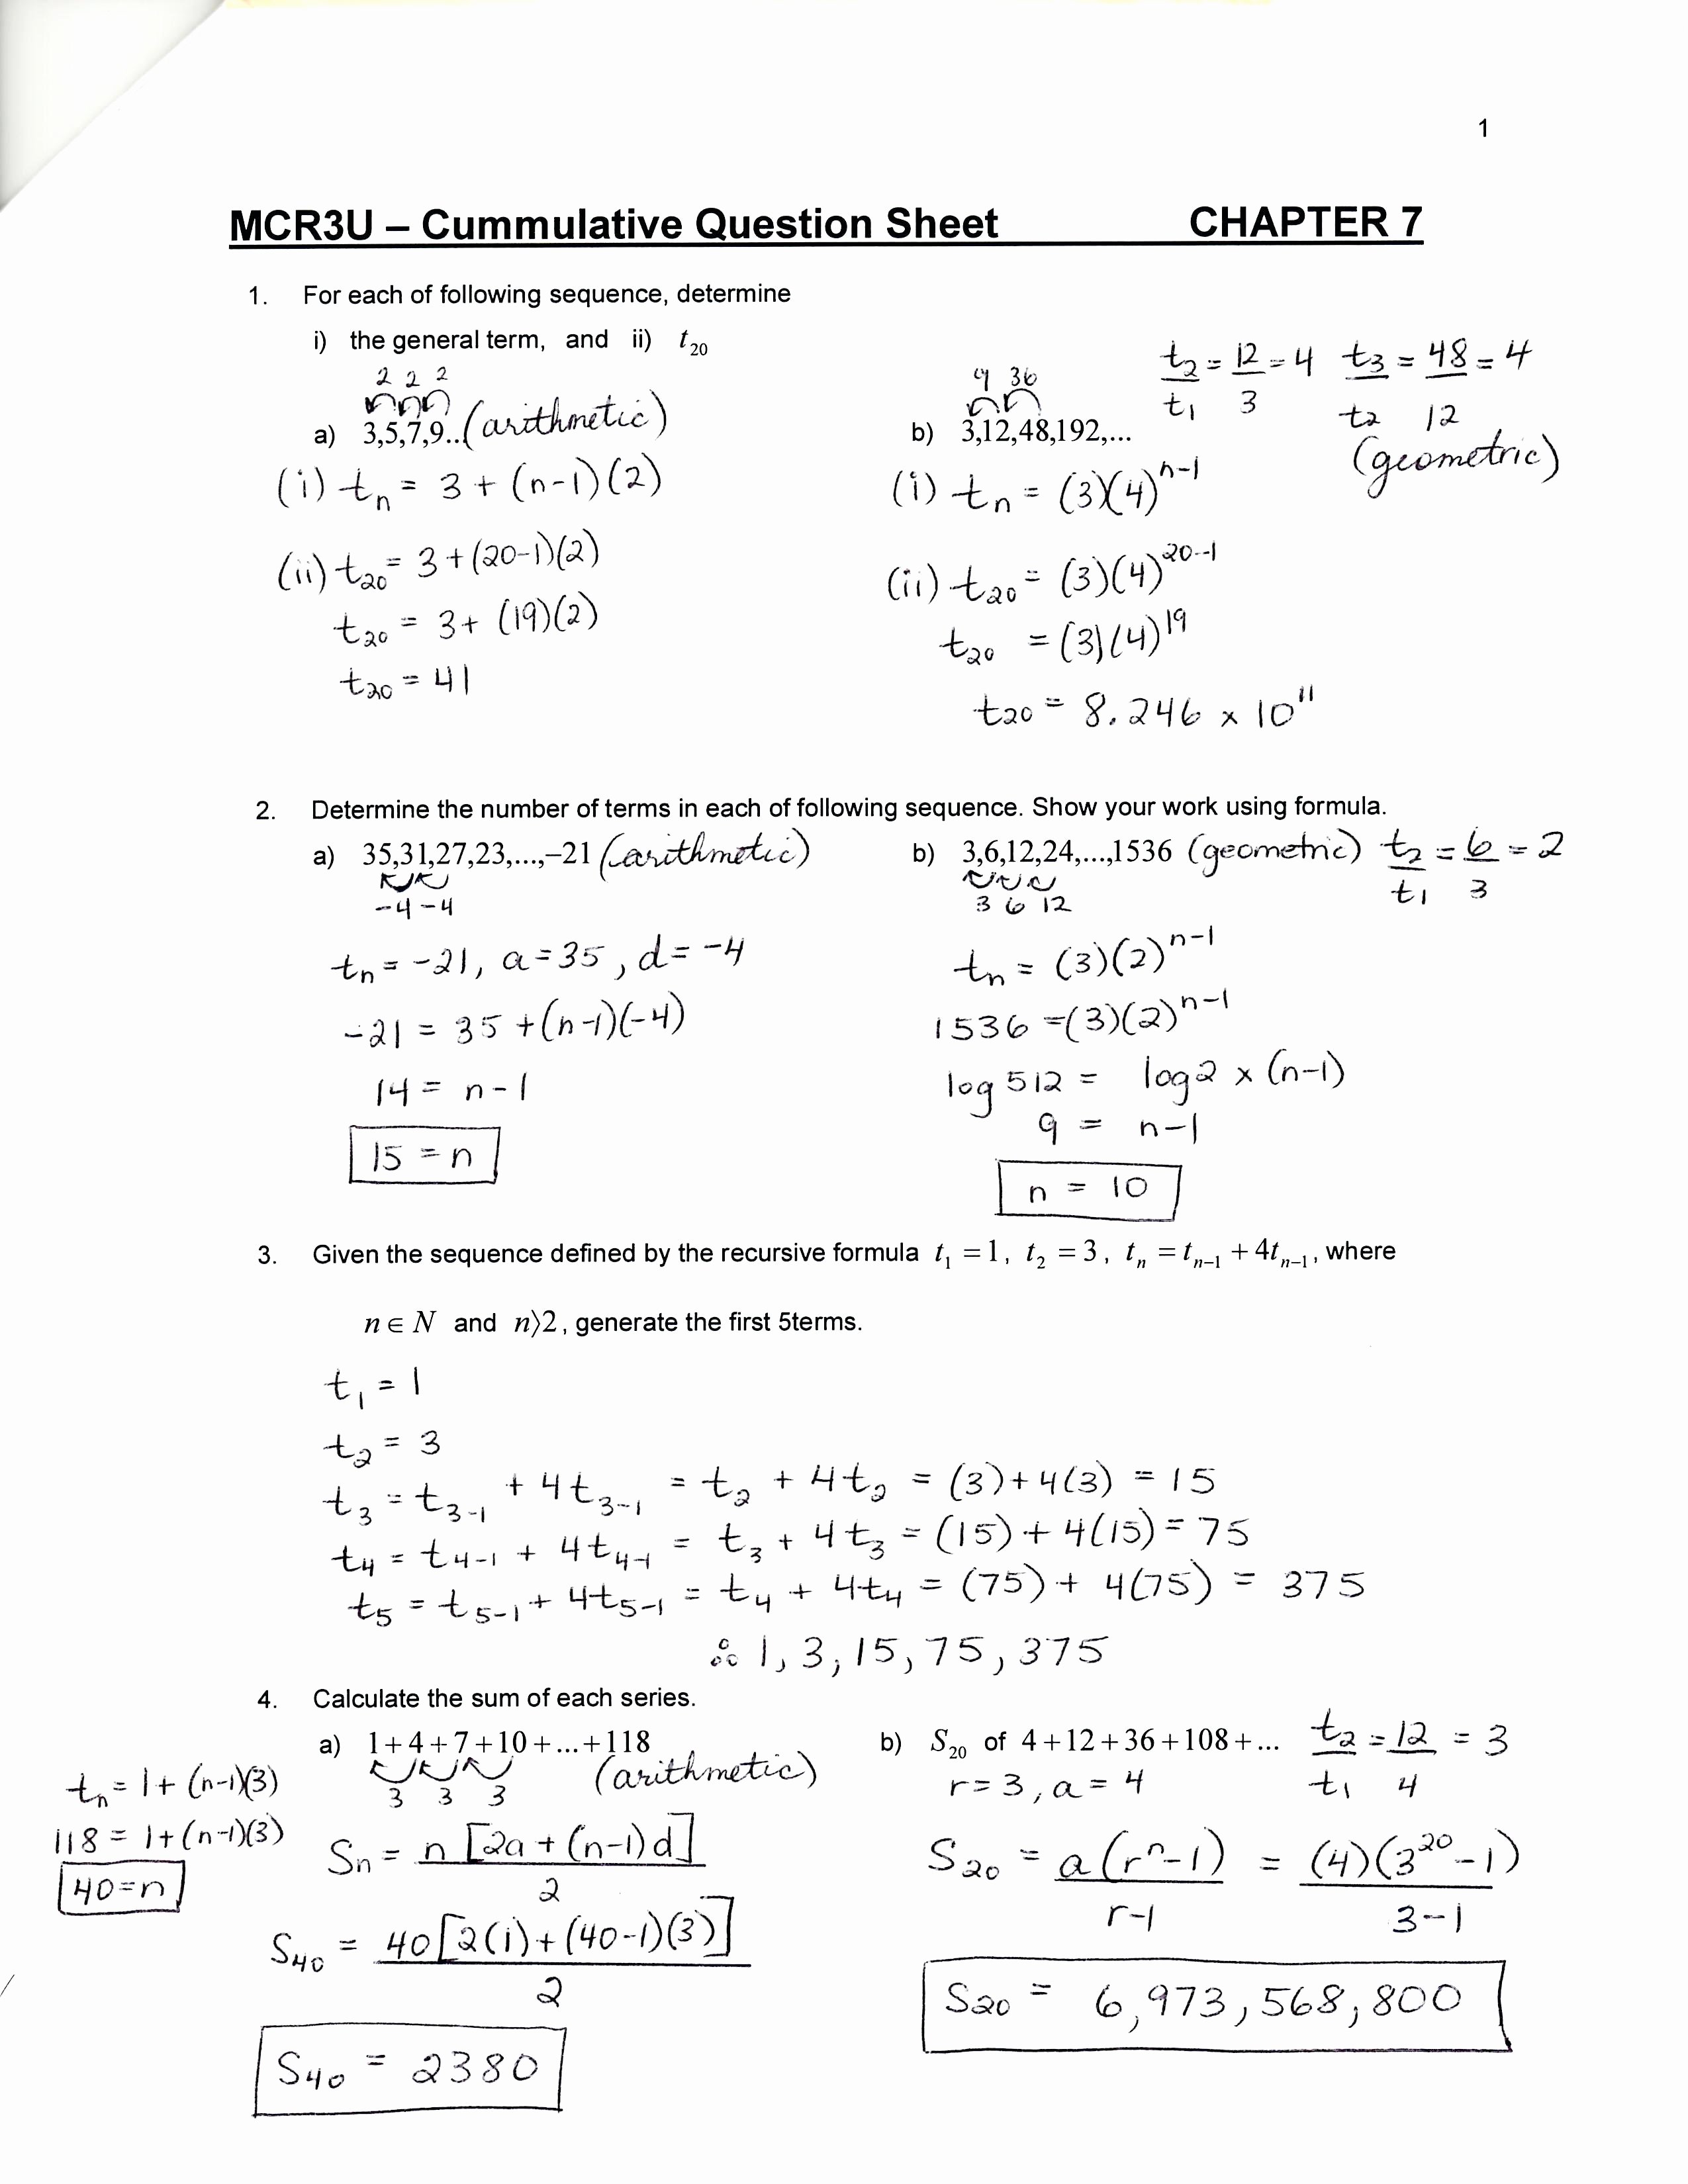 Sequences and Series Worksheet Answers Fresh November 2018 Archives 42 Extraordinary Arithmetic